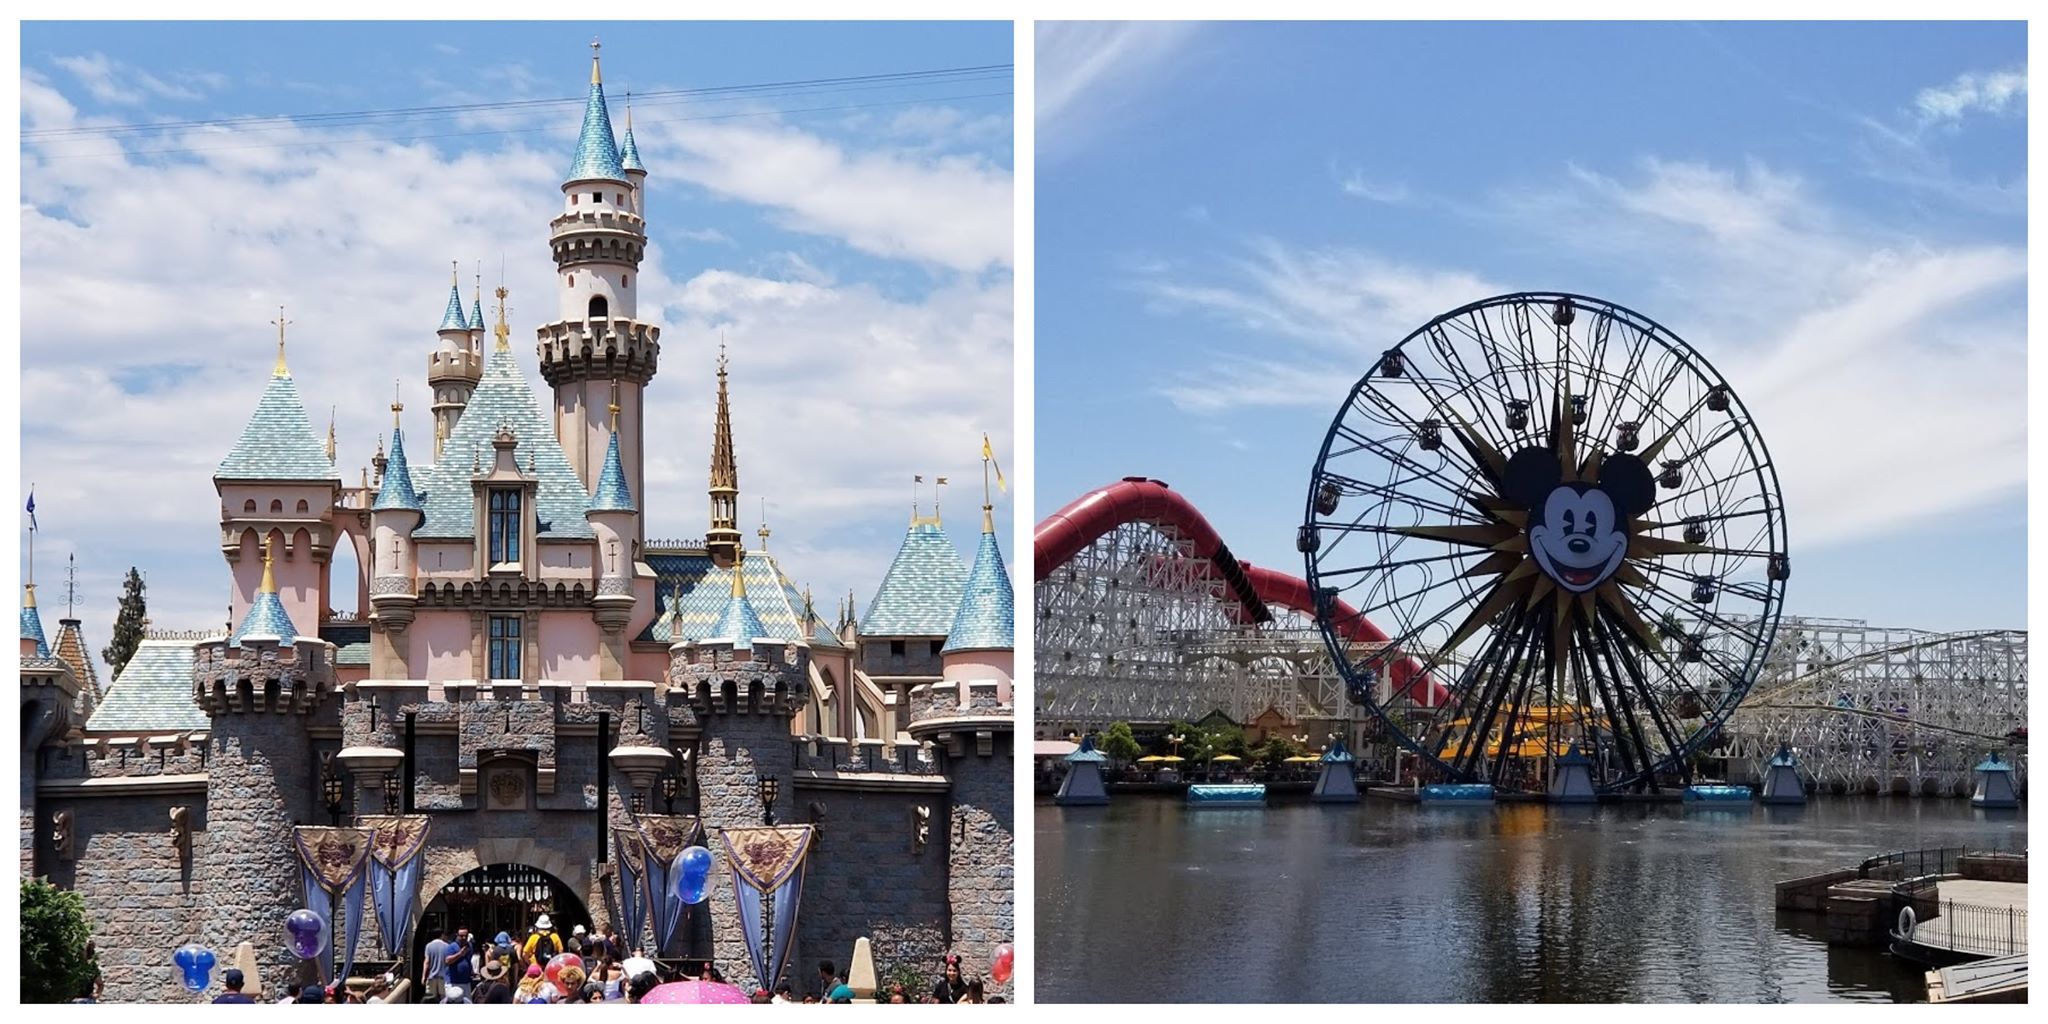 Disneyland Resort pushes reservations for July 15th and later